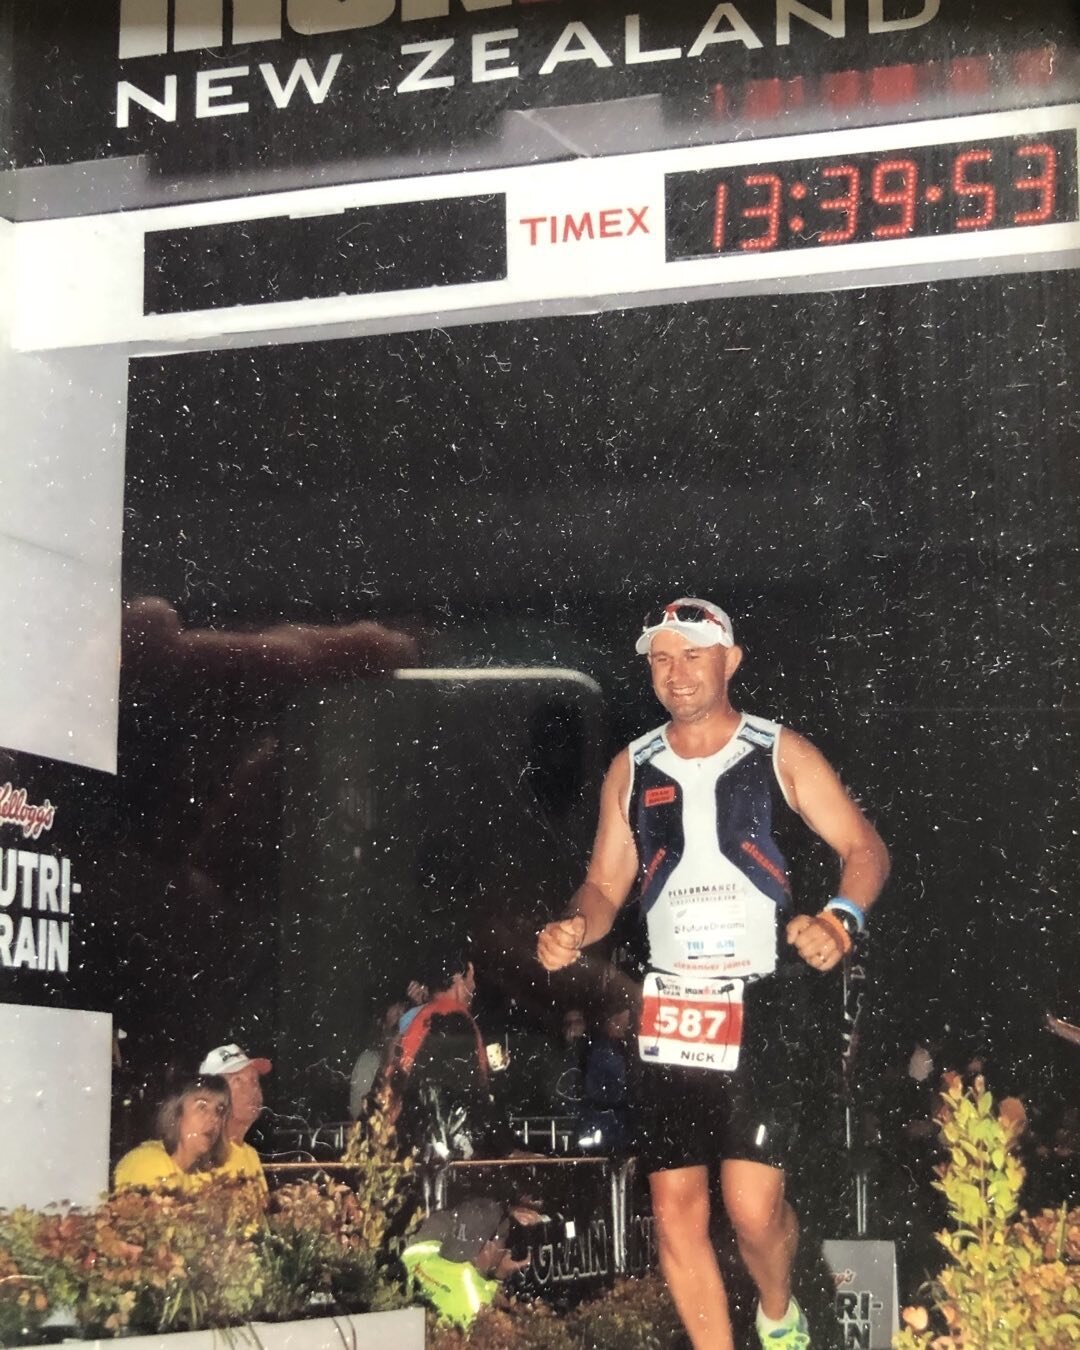 Rehab2ultraman just saw a post from the legendary cam brown that Ironman New Zealand has due to COVID been postponed. To all you athletes. Organisers and families who have been training so hard over the last year I hope you can pick yourself up and k